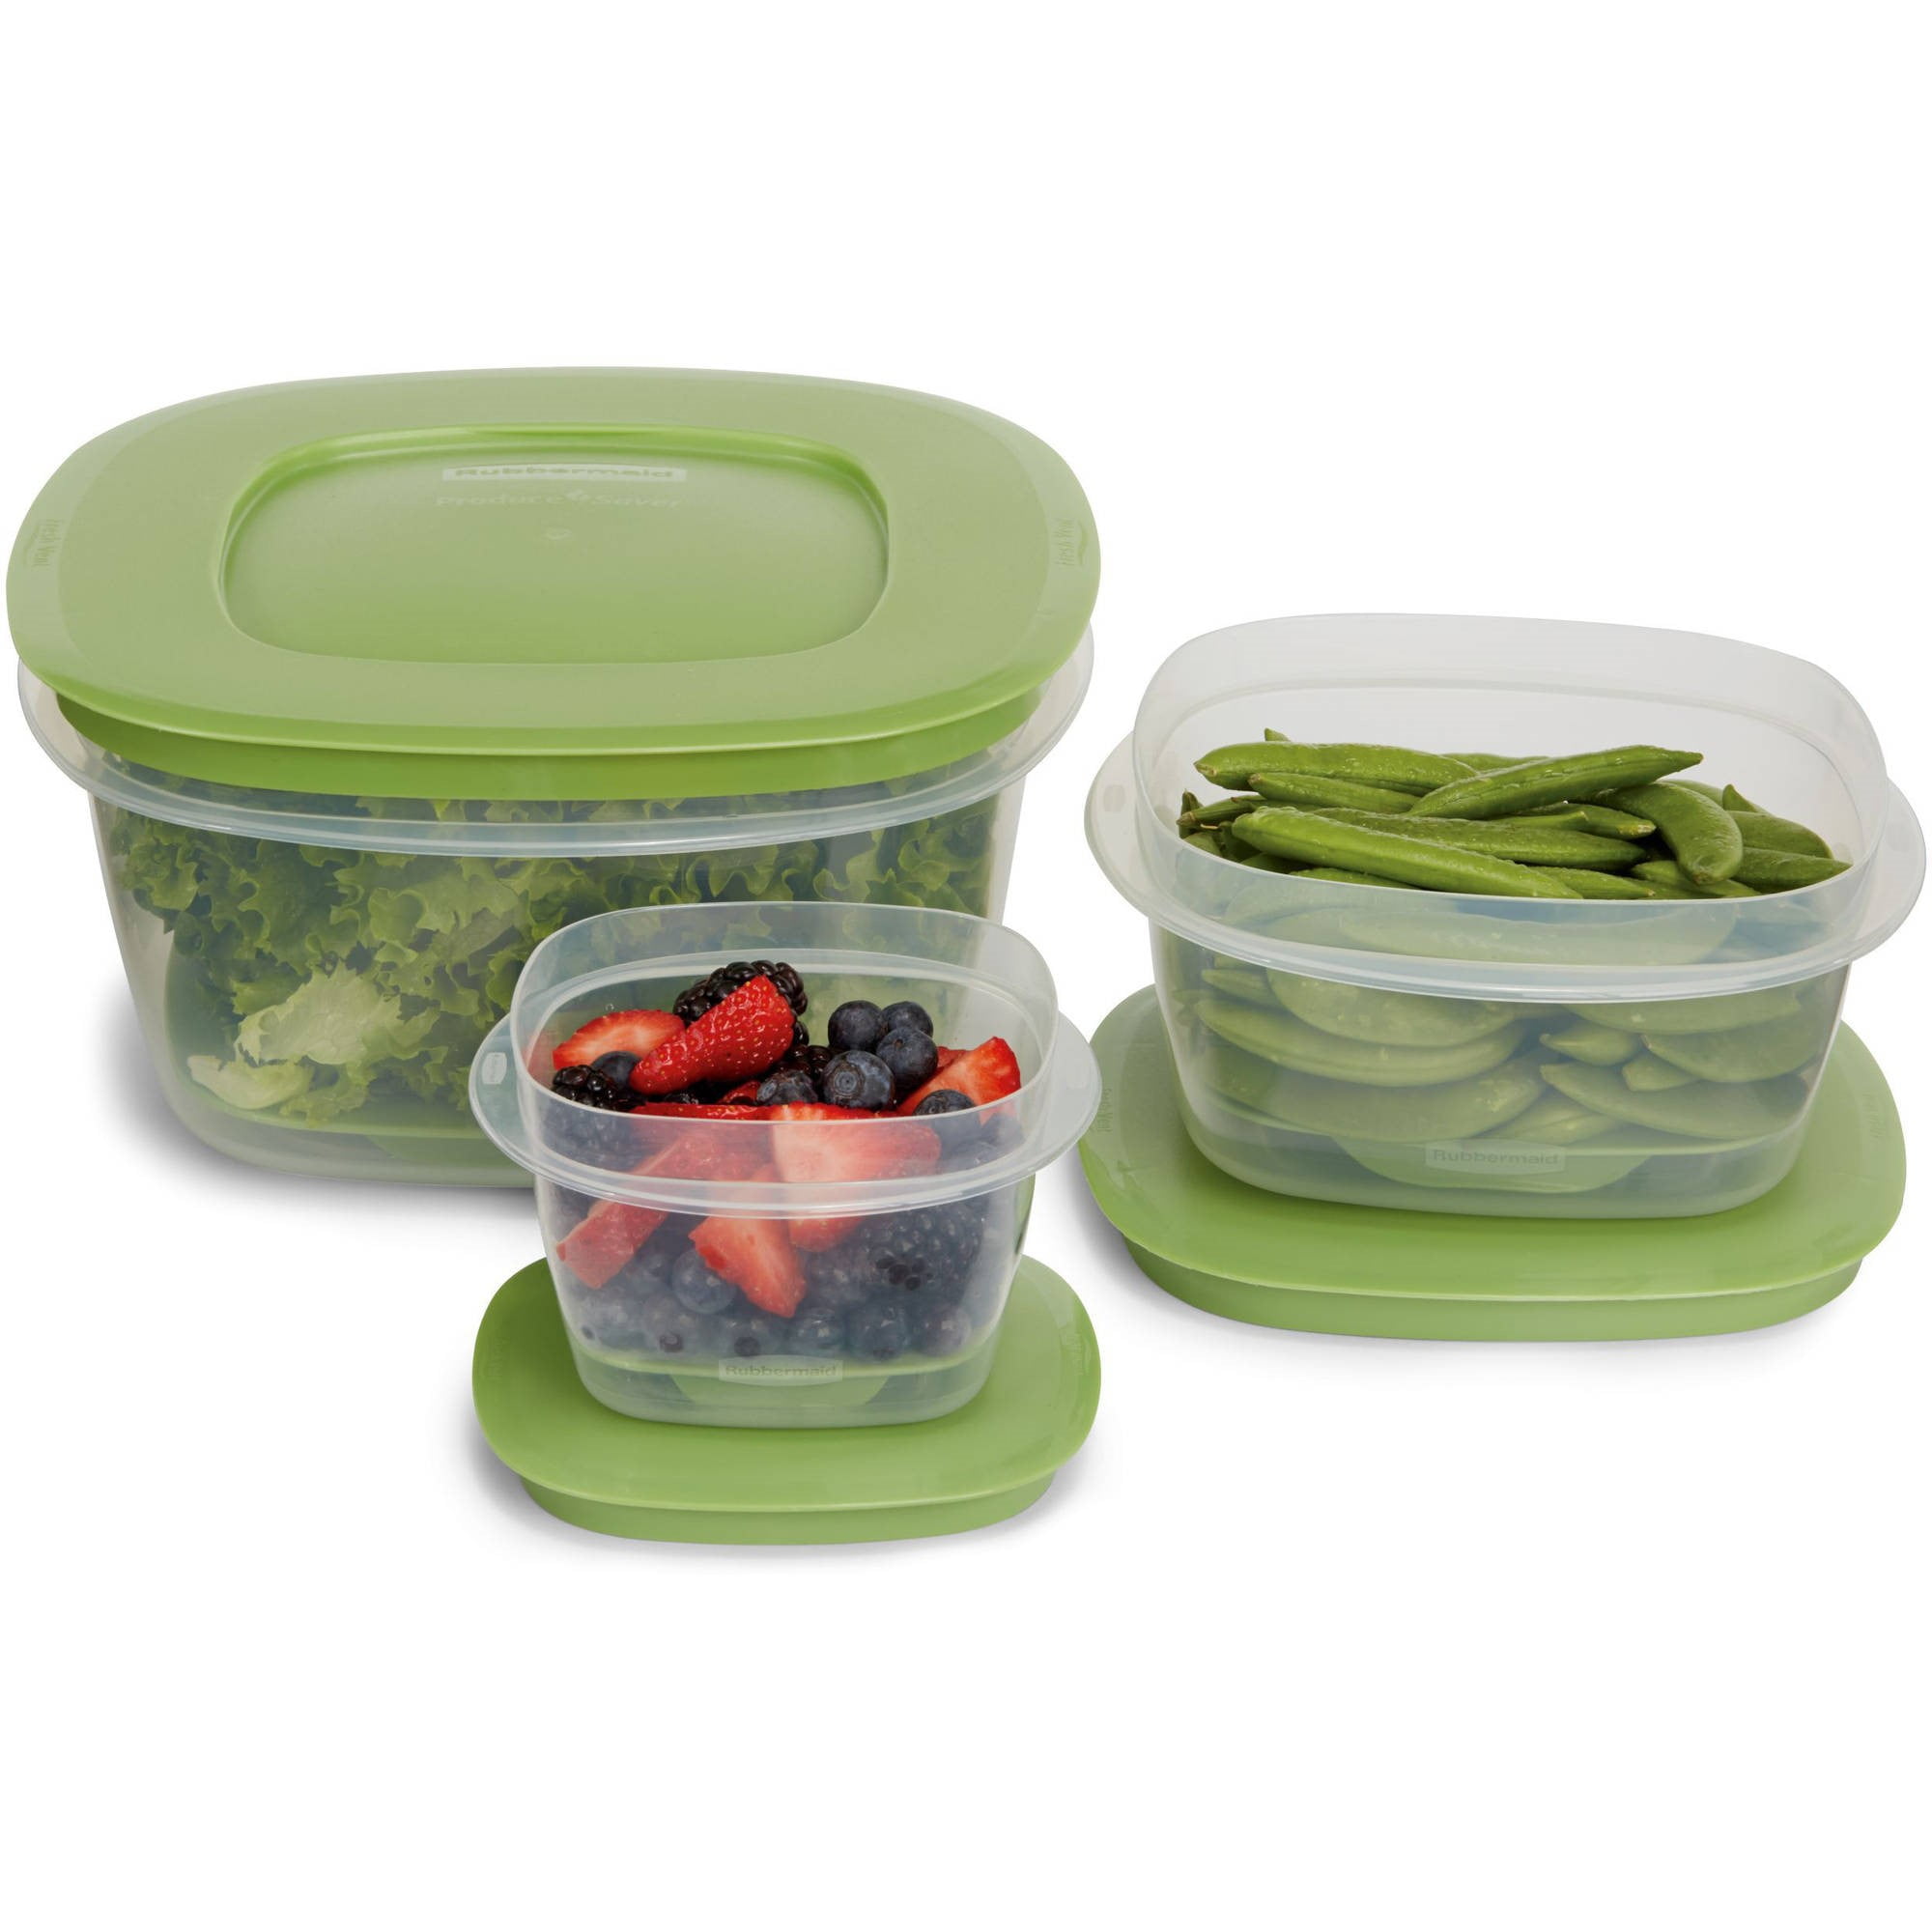 Rubbermaid Produce Saver Food Storage Container, 6-Piece Set